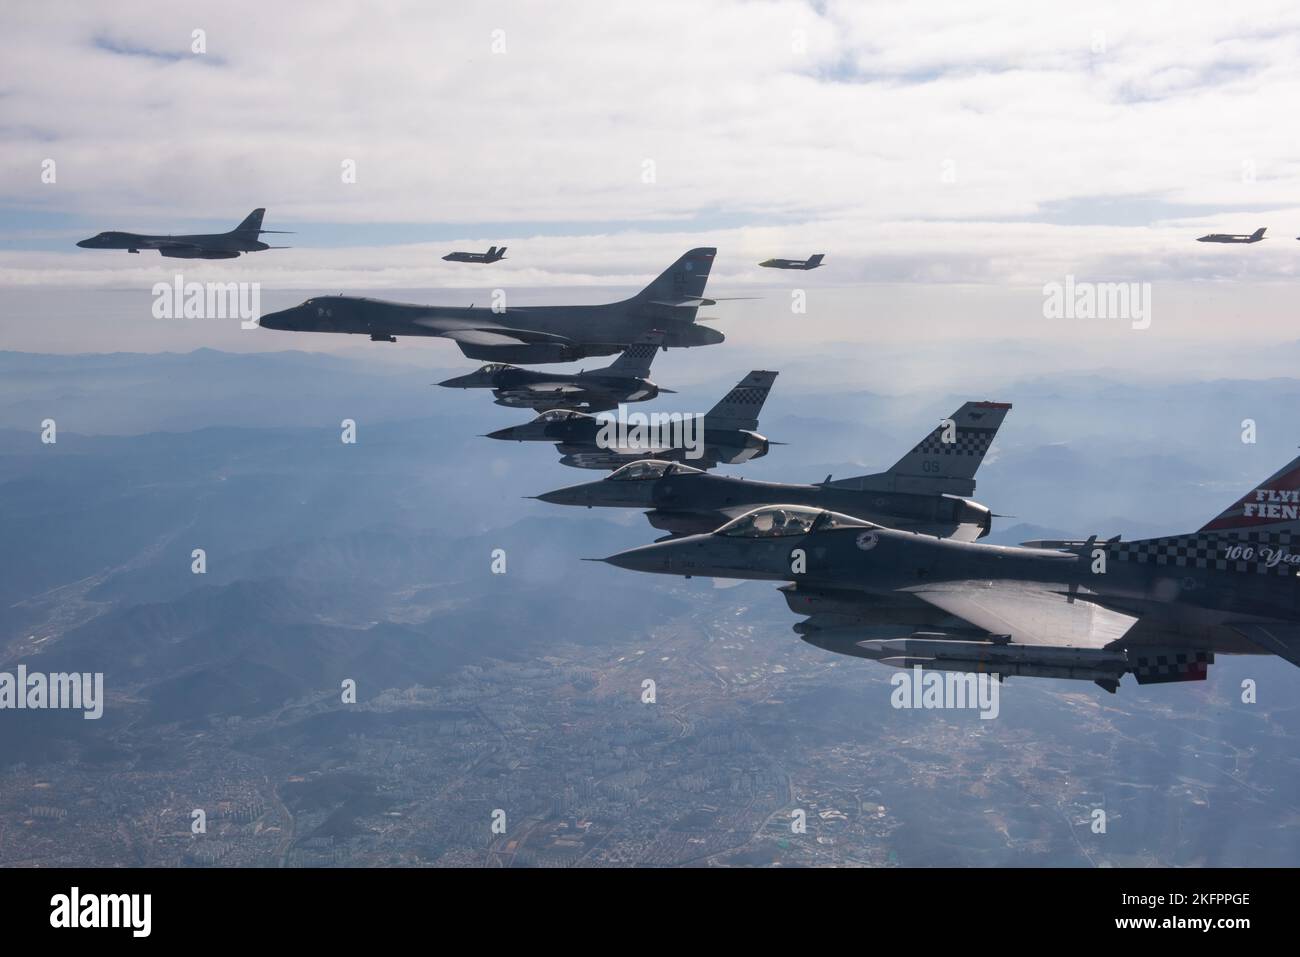 Korean Airspace, South Korea. 19th Nov, 2022. Two U.S. Air Force B-1B Lancer stealth strategic bomber aircraft, are escorted by U.S. Air Force F-16 fighter aircraft and South Korean F-35A stealth fighters during a formation flight in the Korean Air Defense Identification Zone, November 19, 2022, over South Korea. The show of force flight is in response to multiple North Korean missile launches. Credit: SrA Megan Estrada/U.S. Air Force Photo/Alamy Live News Stock Photo